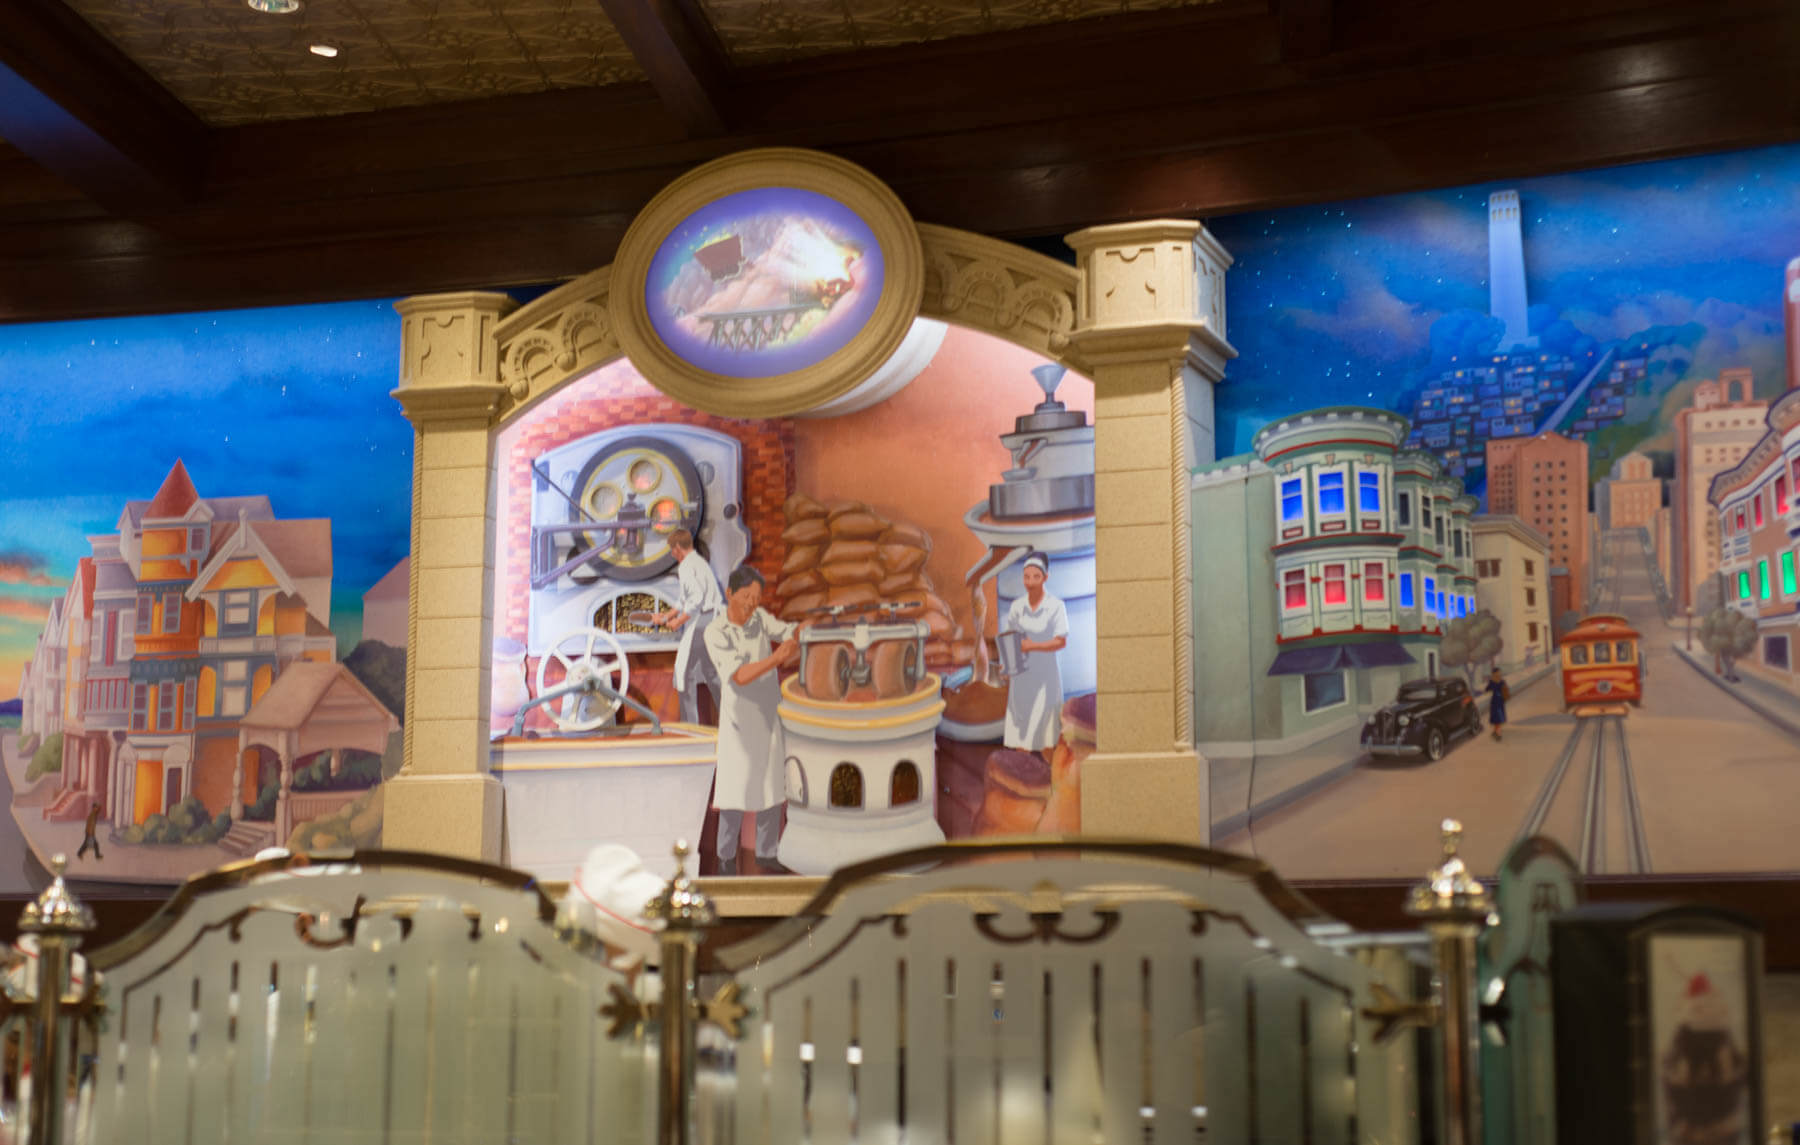 Ghiradelli's Chocolate Shop Factory Mural | Where to Find Good Coffee at Disneyland